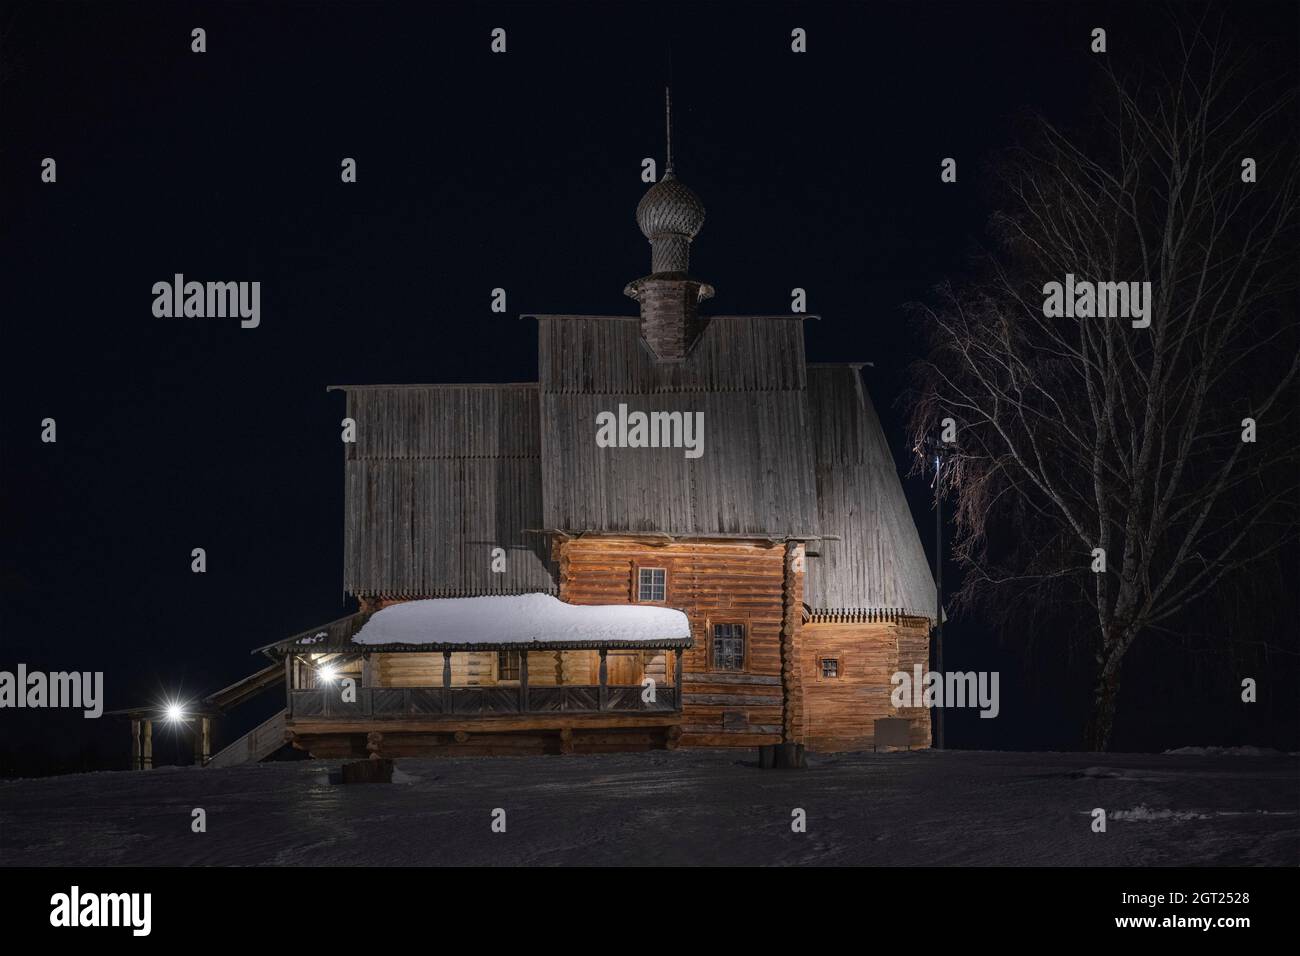 Exterior Of Illuminated Building Against Sky At Night Stock Photo